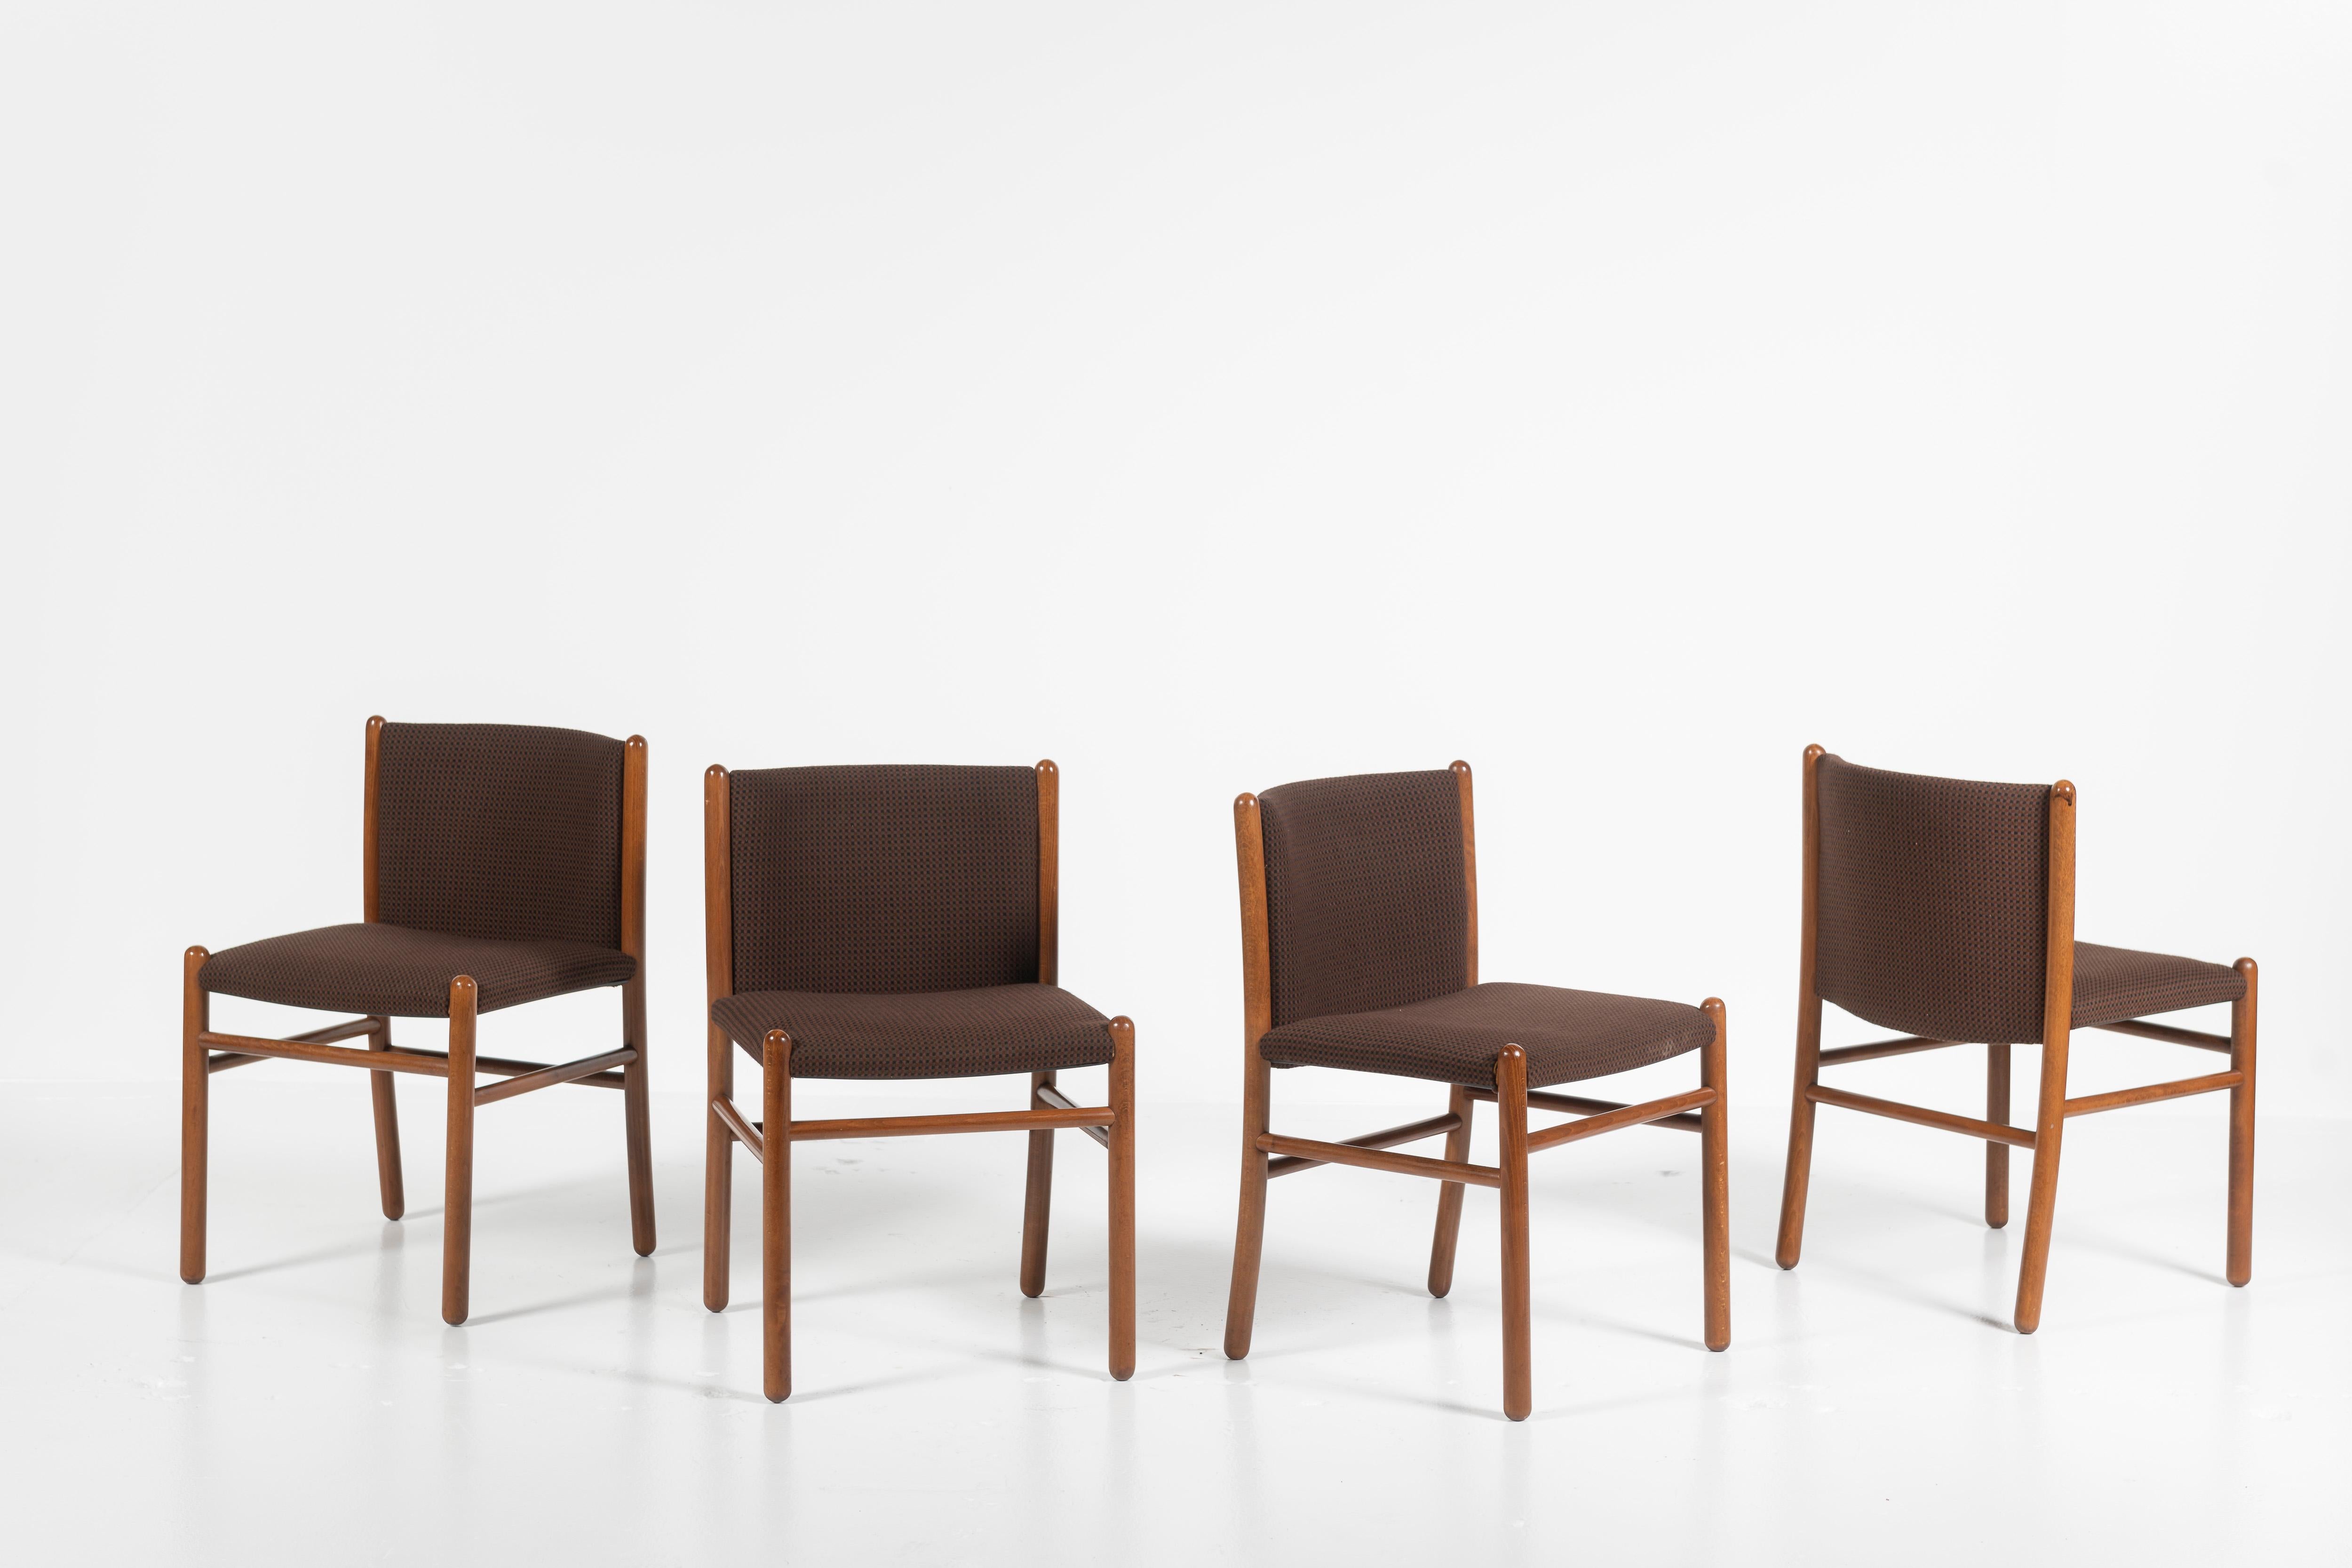 Sold as a set of four, these Dining Chairs, designed by Gianfranco Frattini for Lema S.P.A., Italy, are in good condition, with a few scratches on the legs. The chairs have the origin upholstery though reupholstery would enhance these comfortable